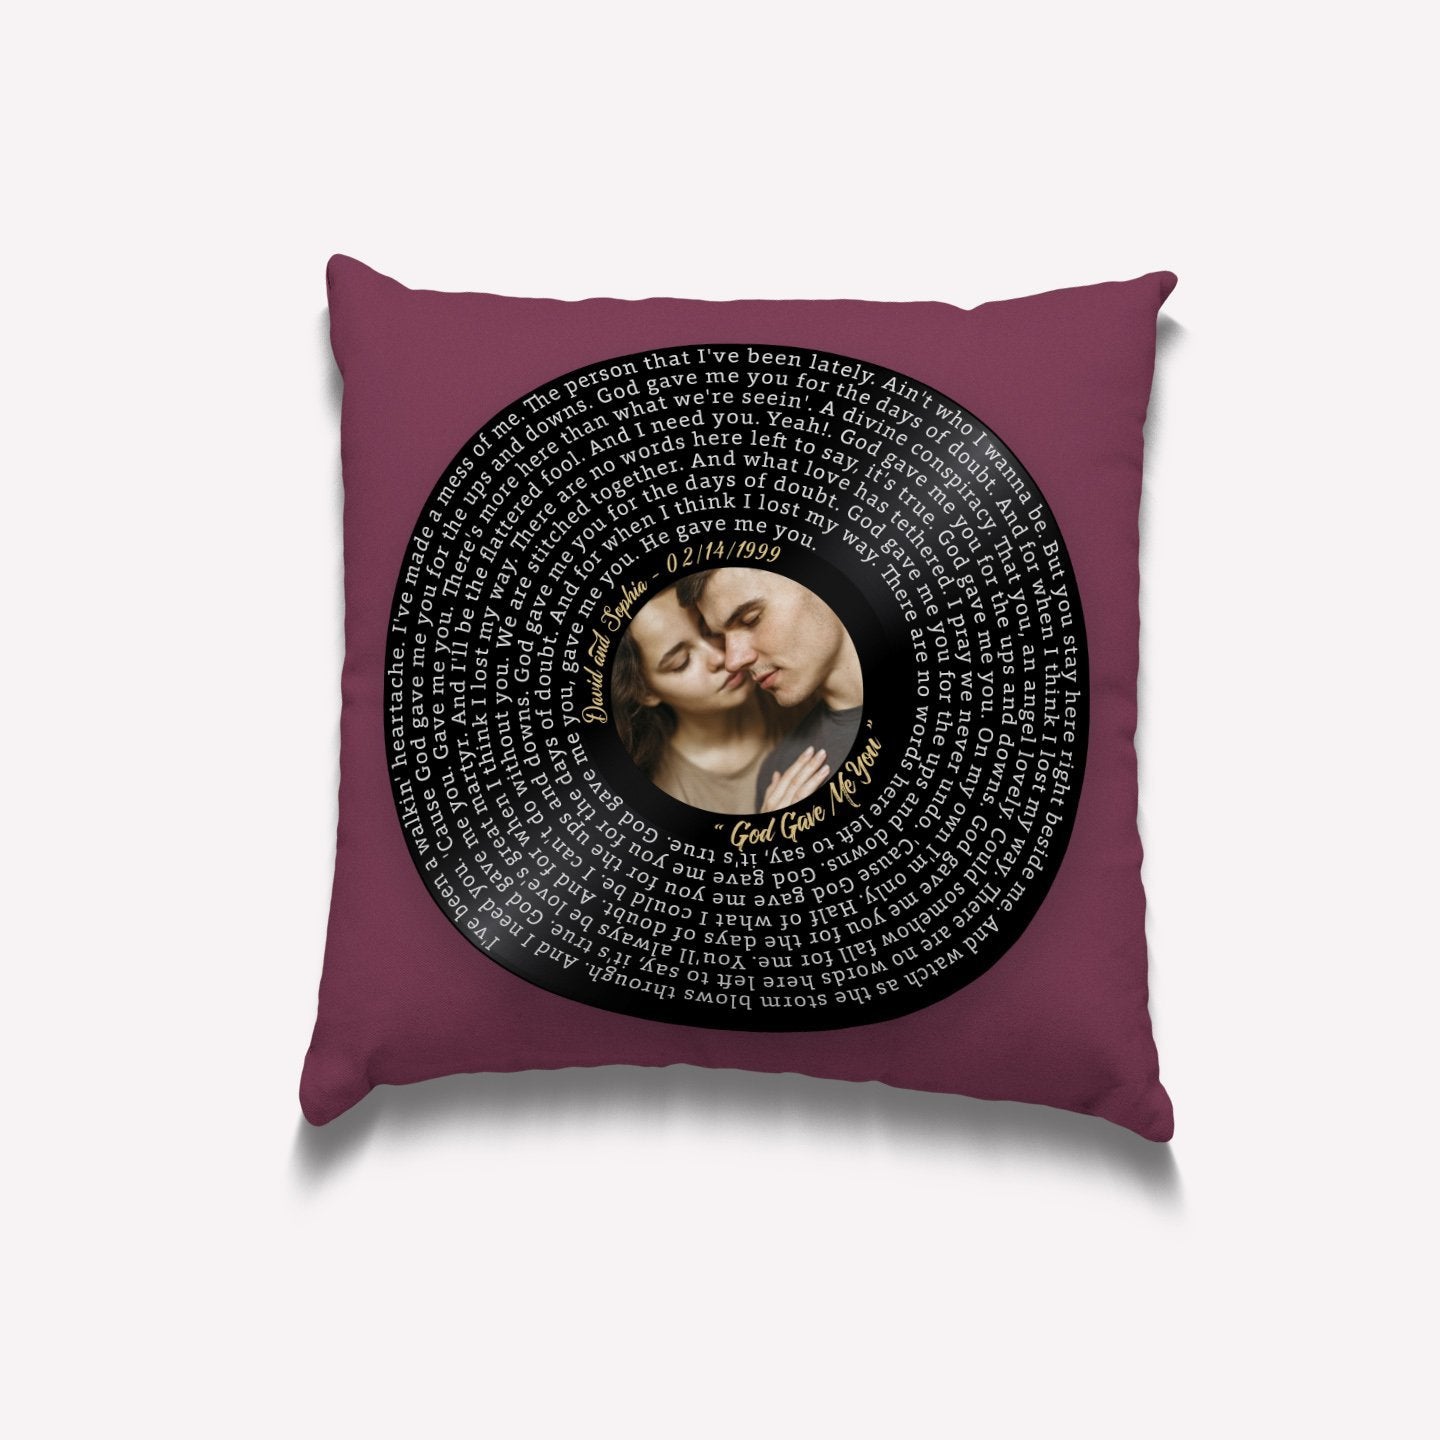 Custom Song Lyrics, Upload Photo, Personalized Name And Date, Vinyl Record Pillow